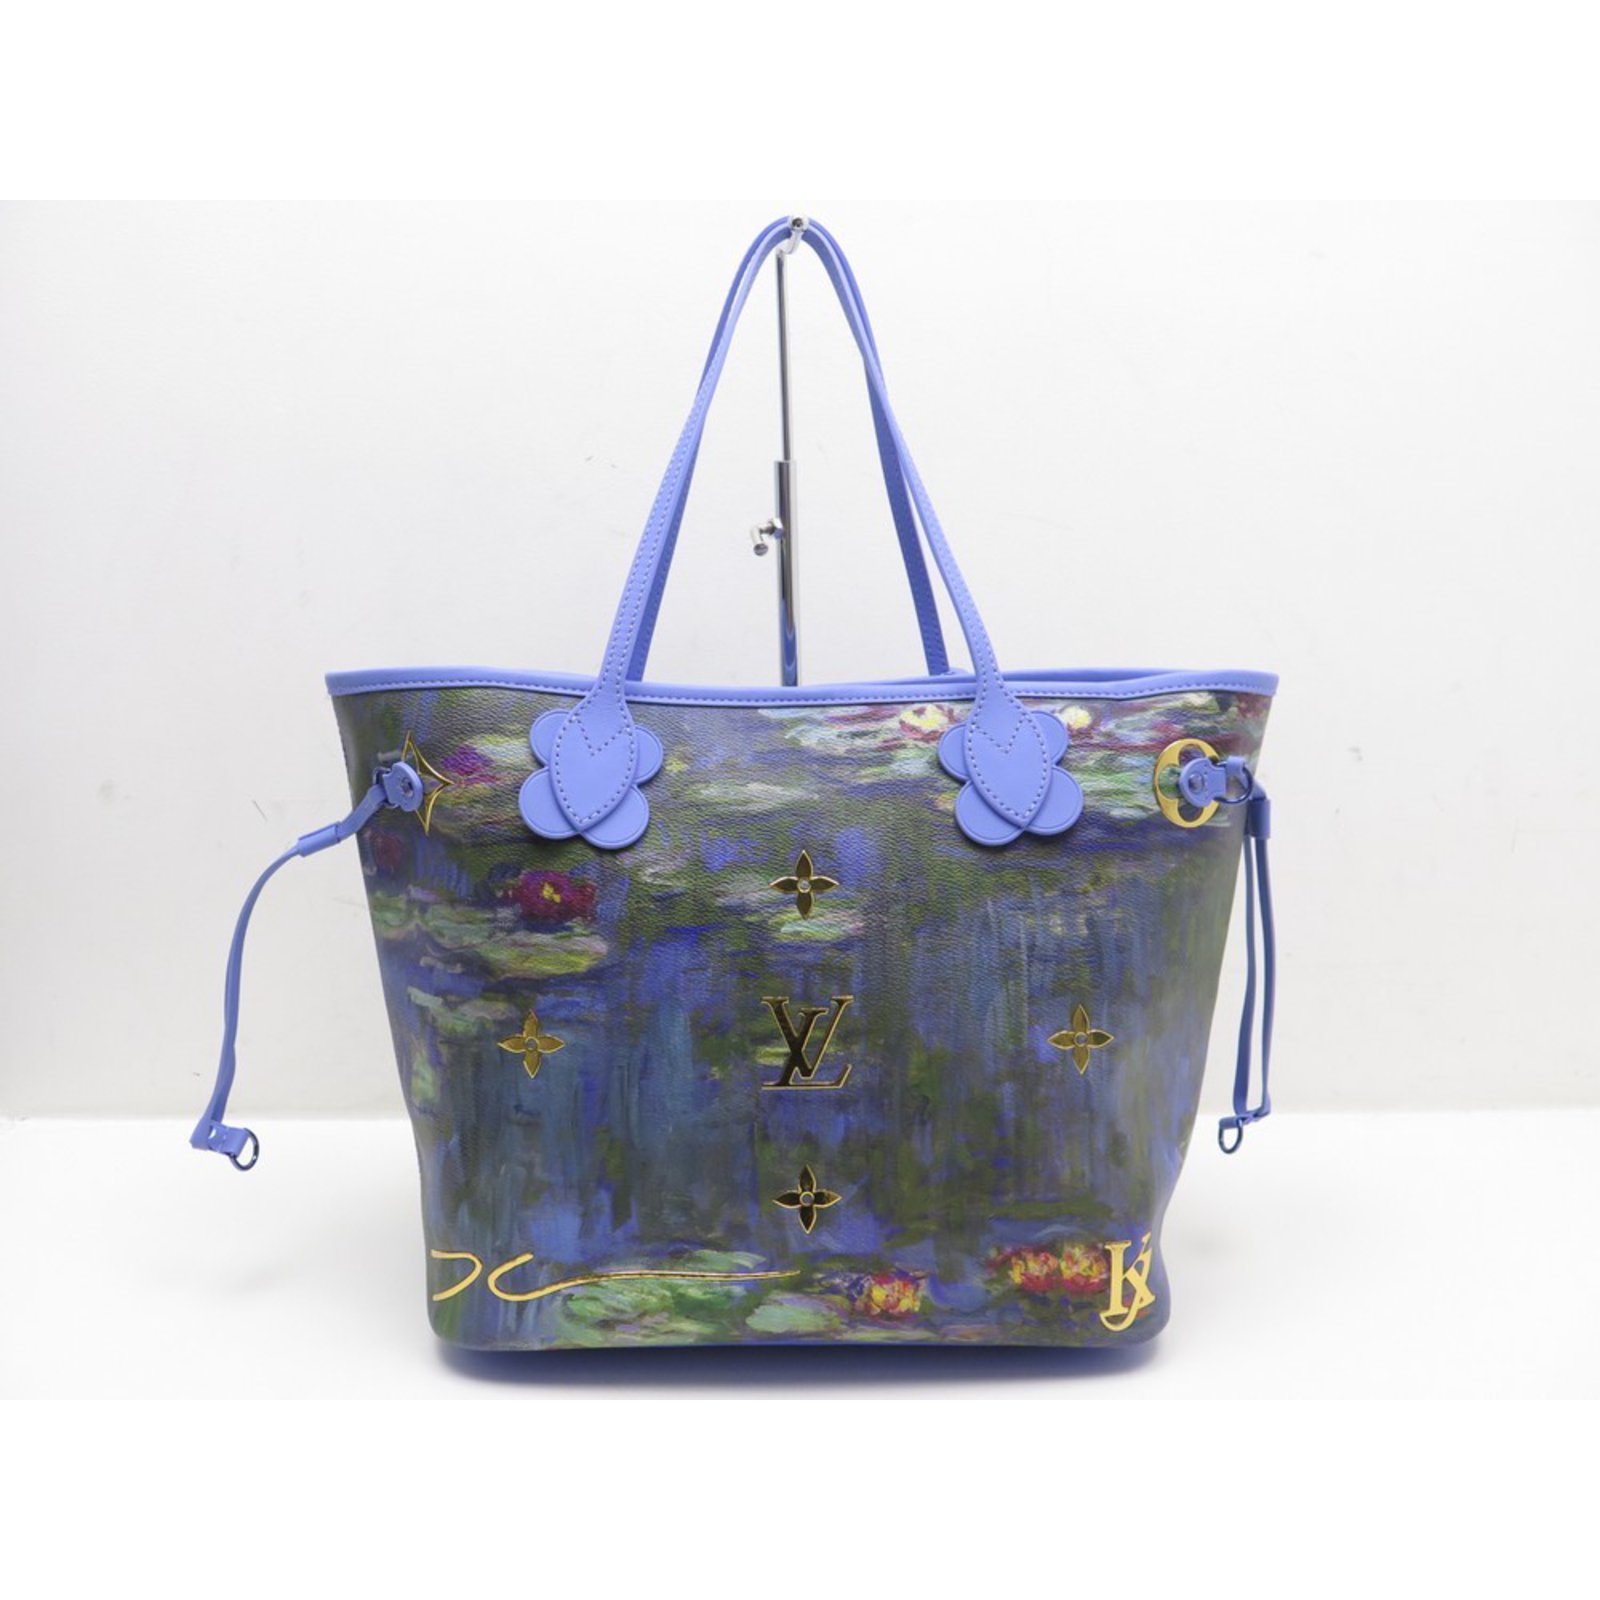 Louis Vuitton Neverfull NM Tote Limited Edition Jeff Koons Monet